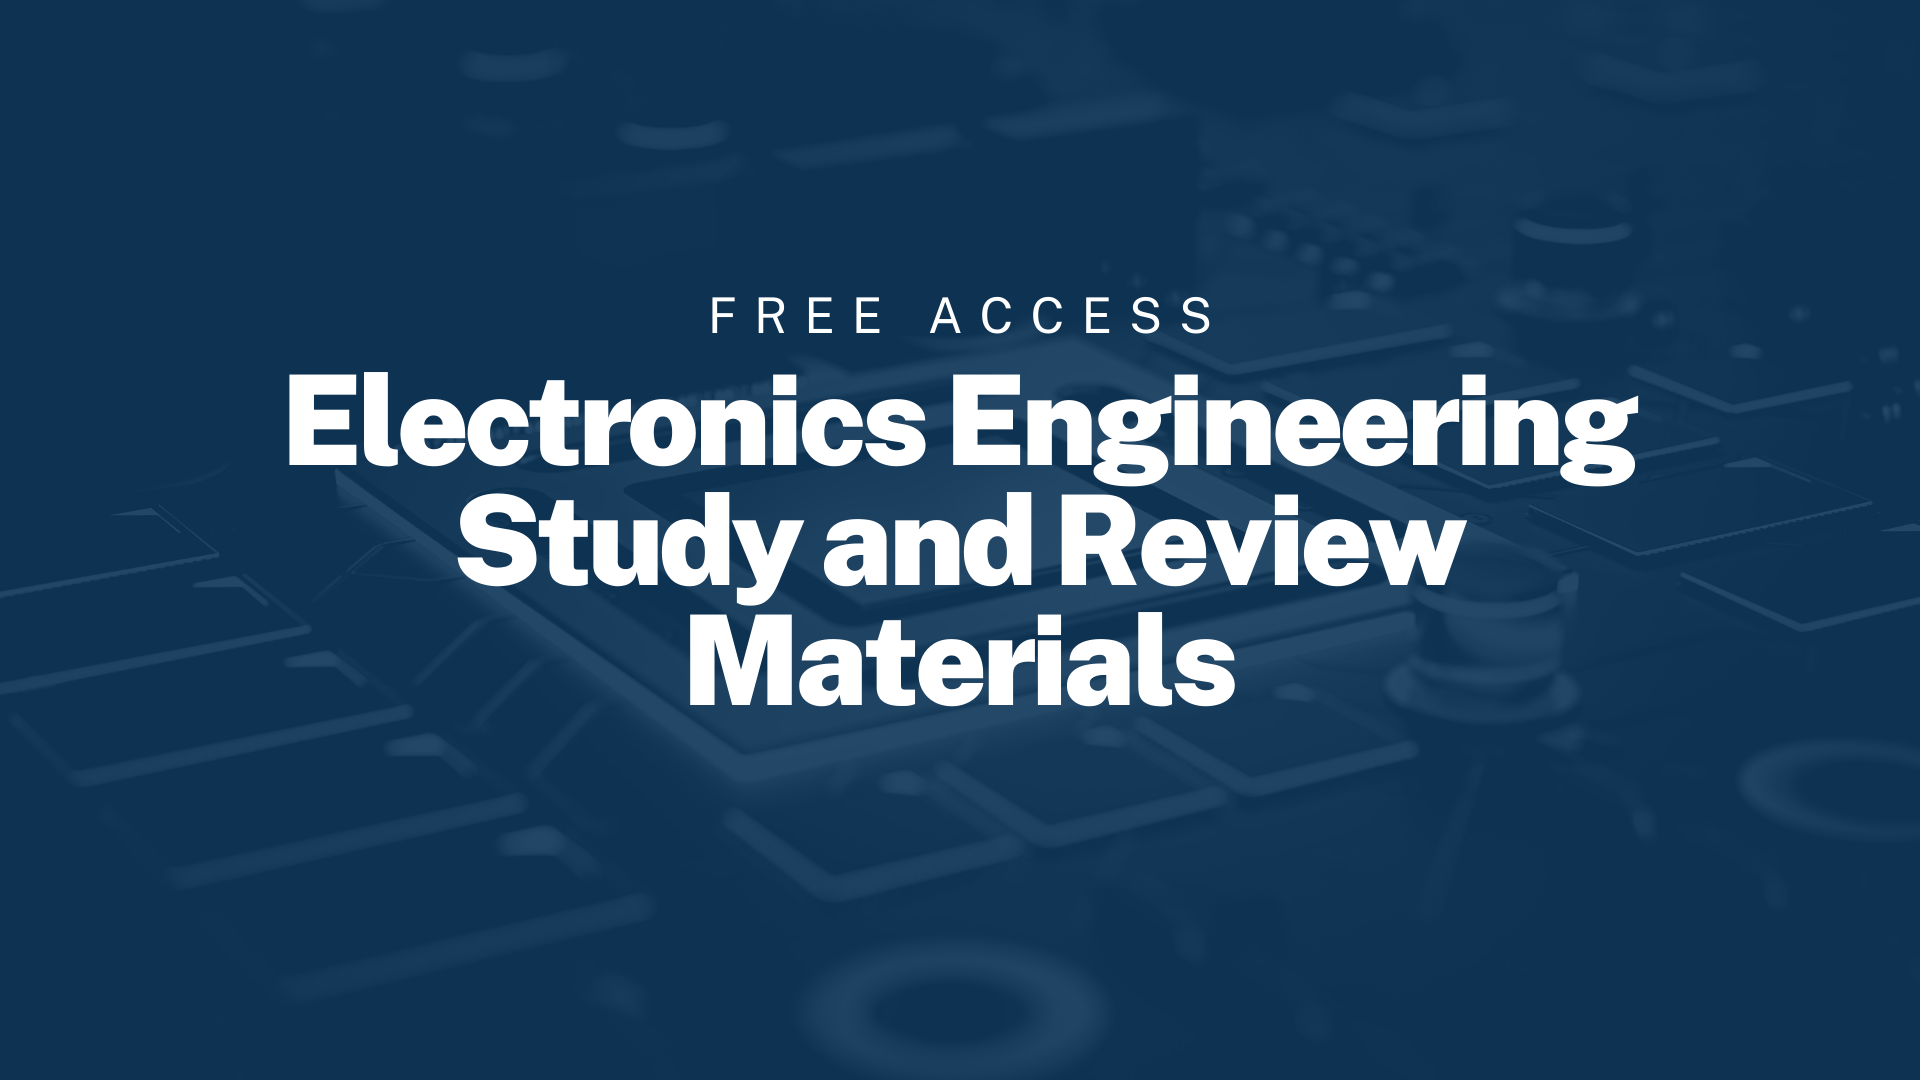 FREE ACCESS: Electronics Engineering Study and Review Materials